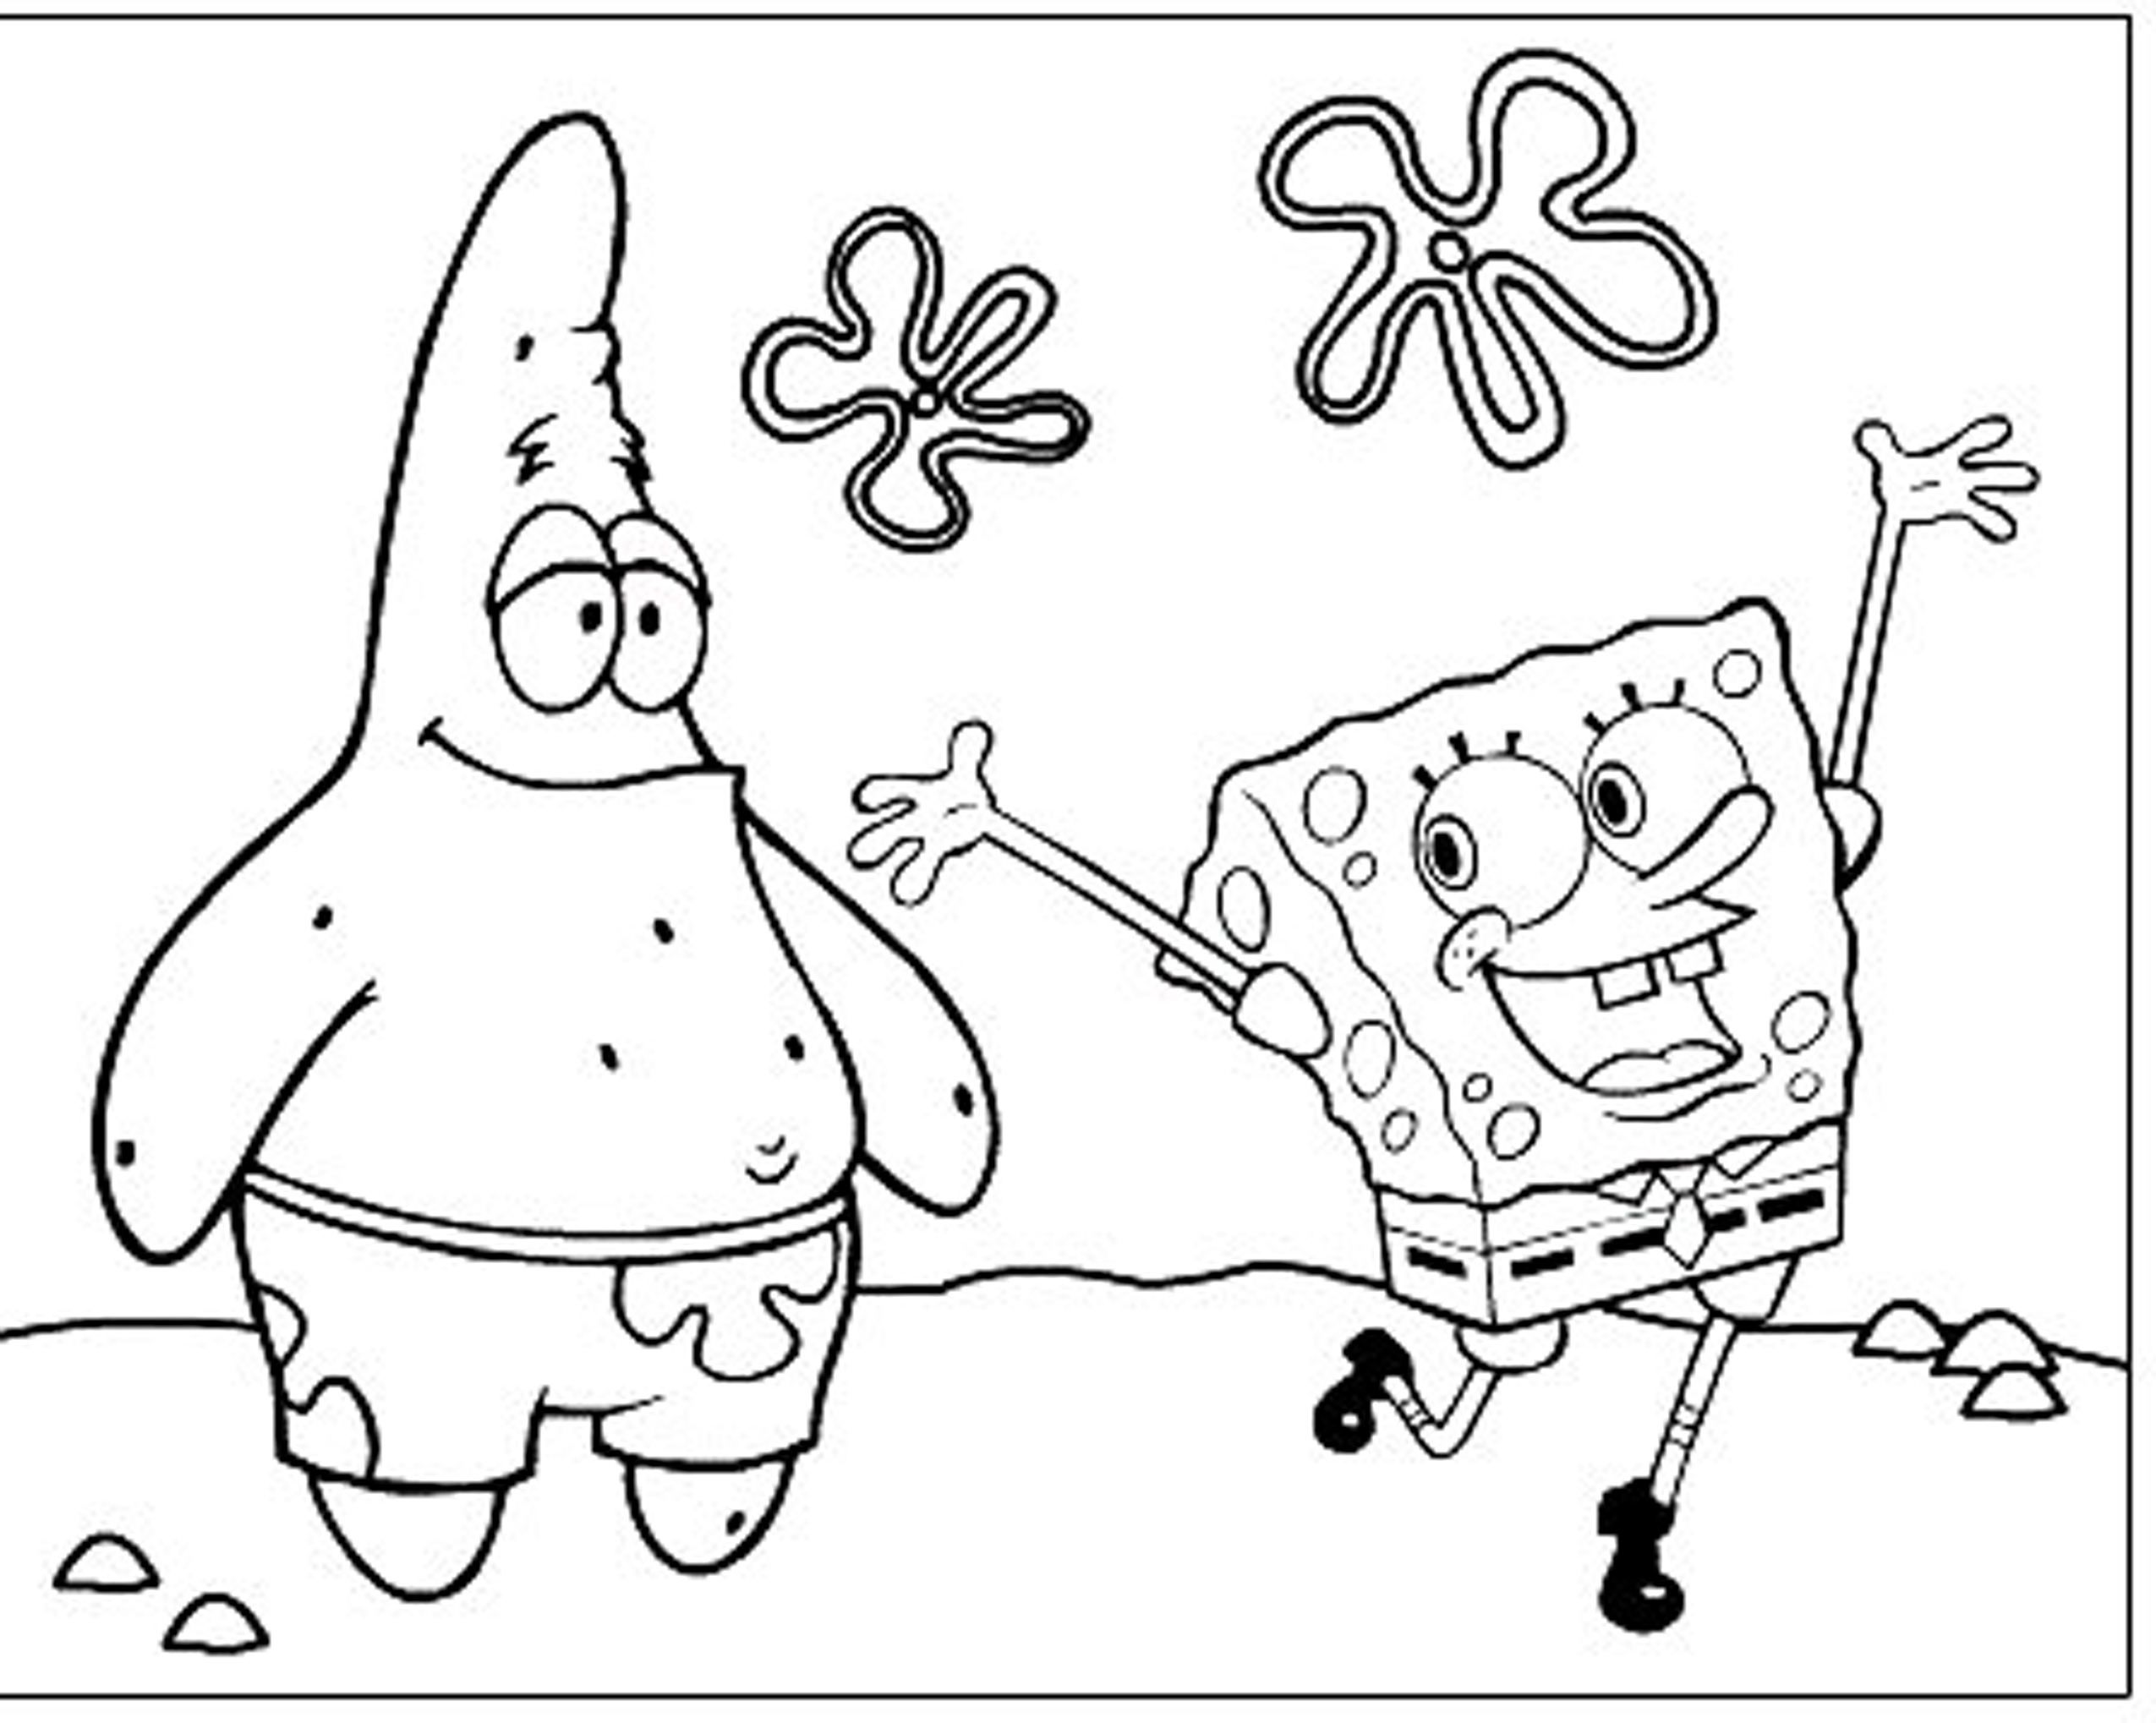 Cool Spongebob Characters 68 Coloring Page